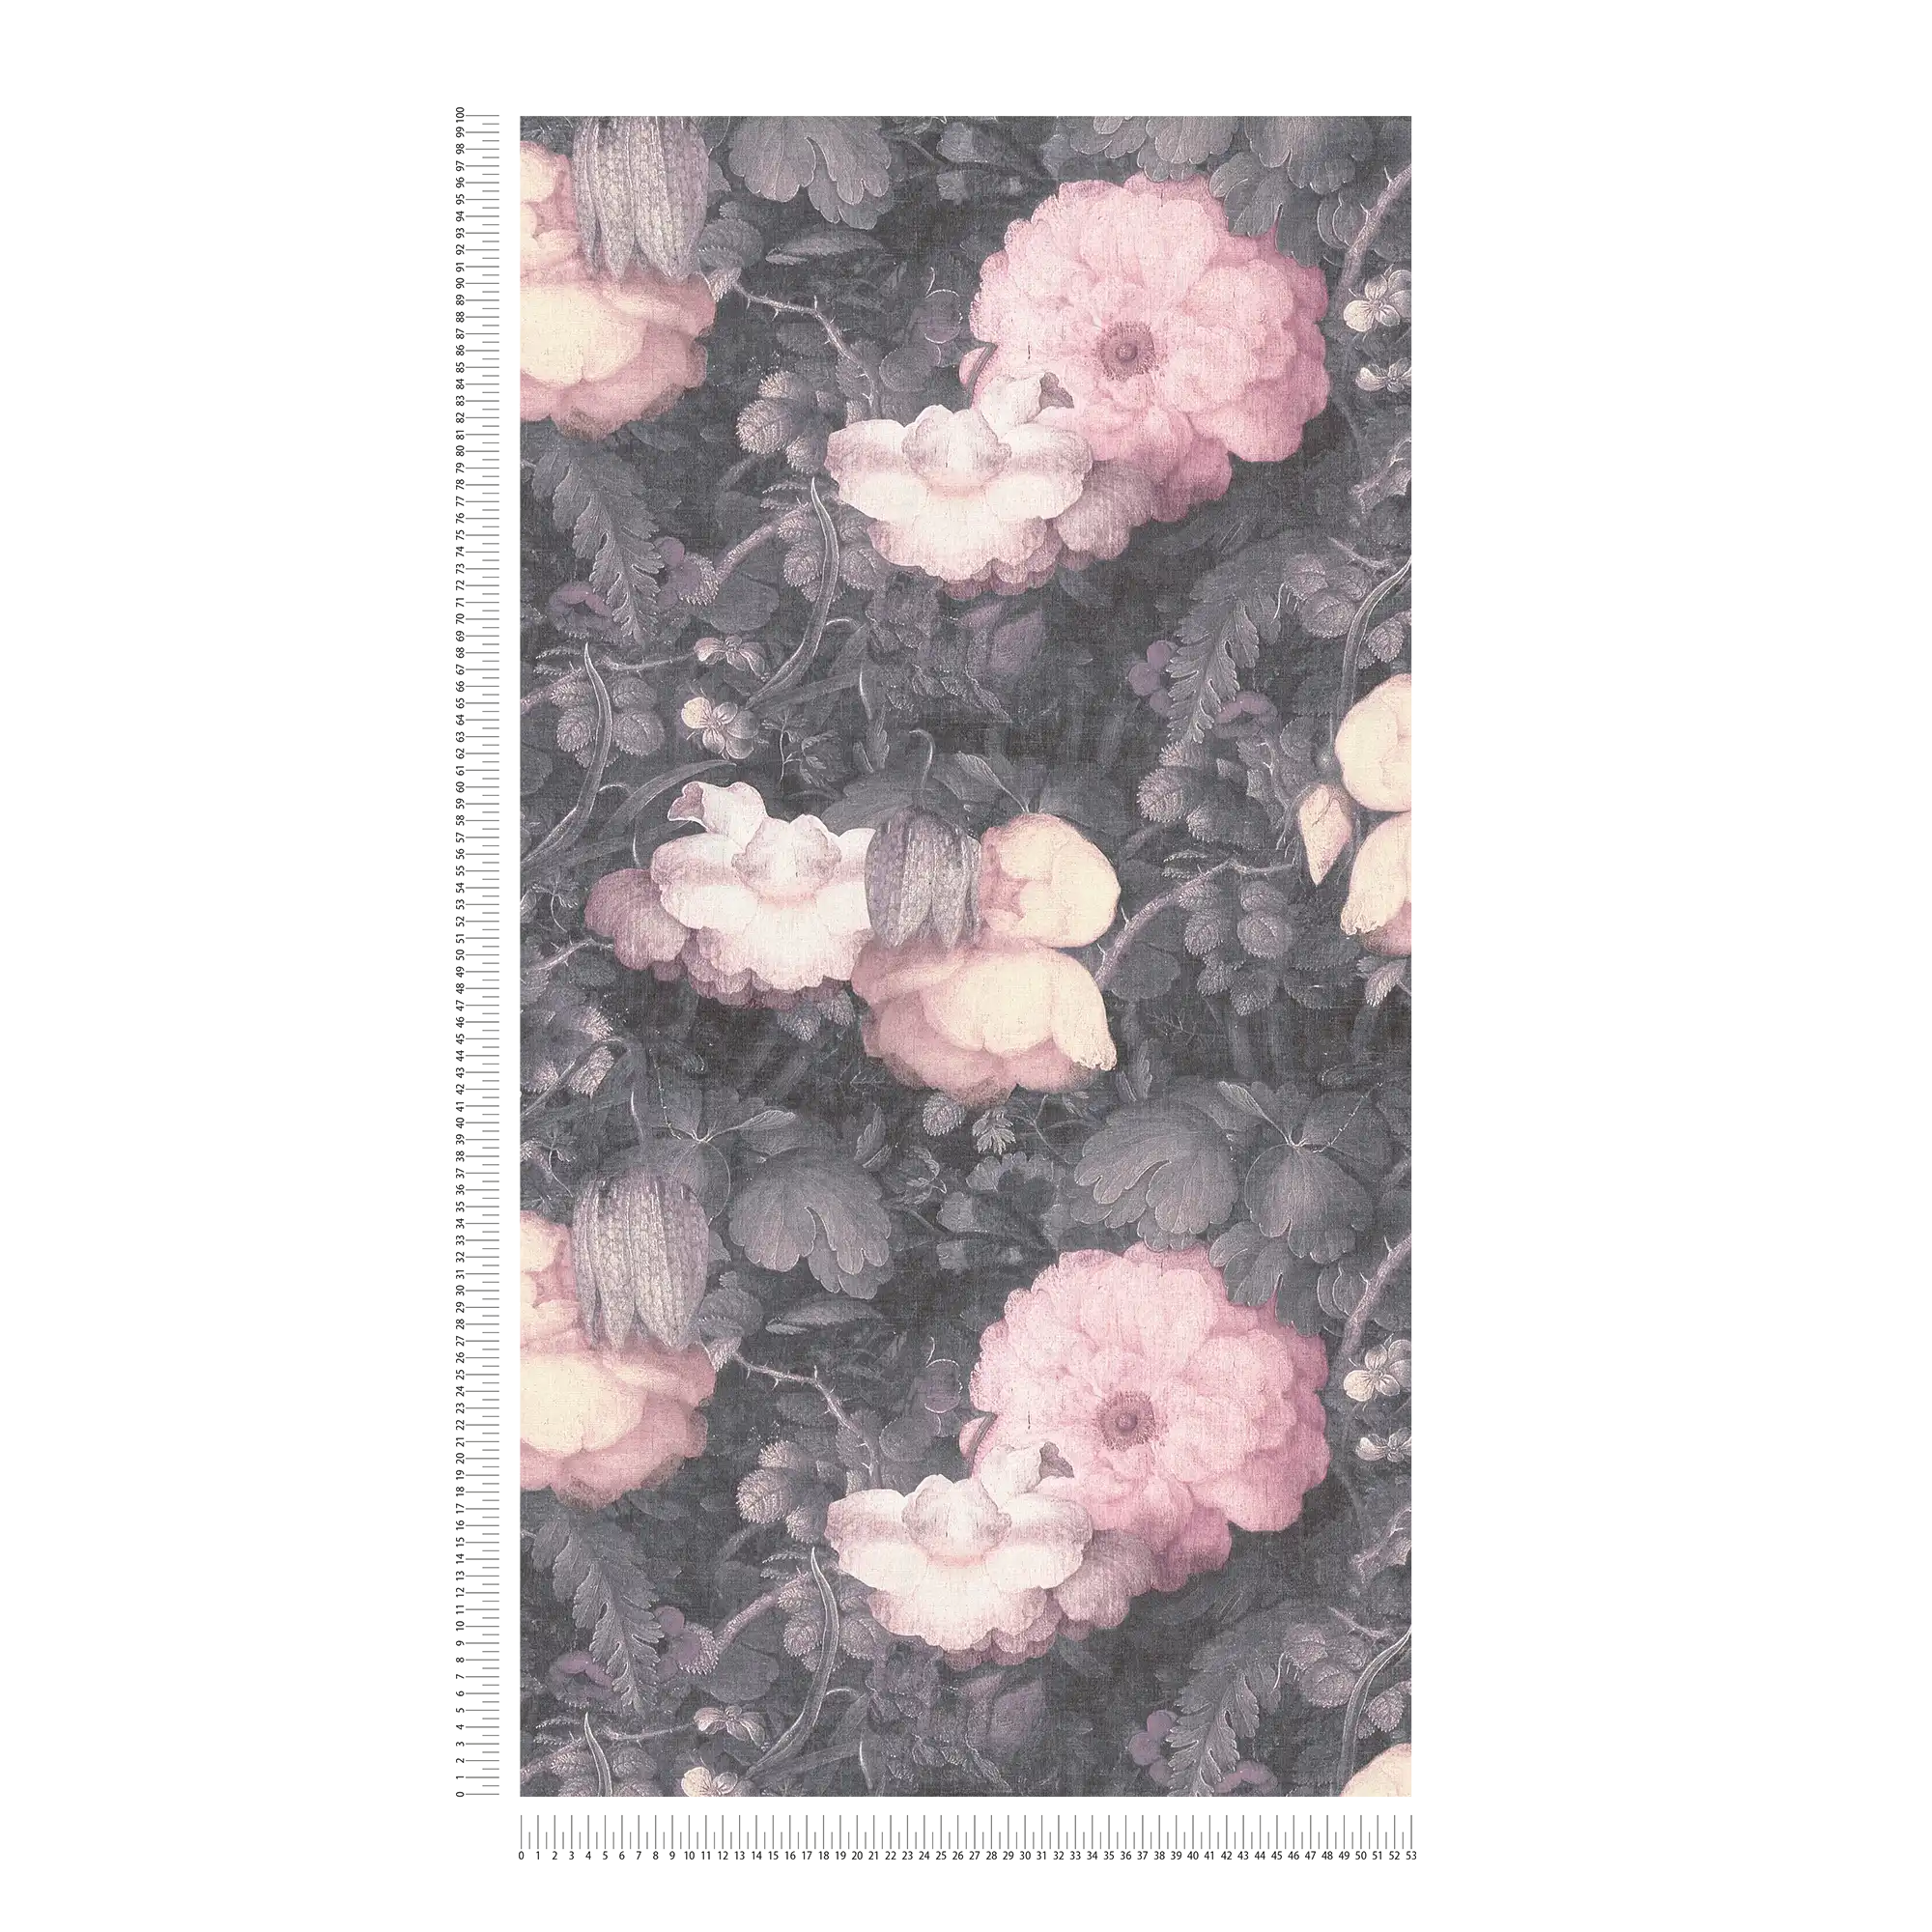             Painting style floral wallpaper, canvas look - grey, pink, black
        